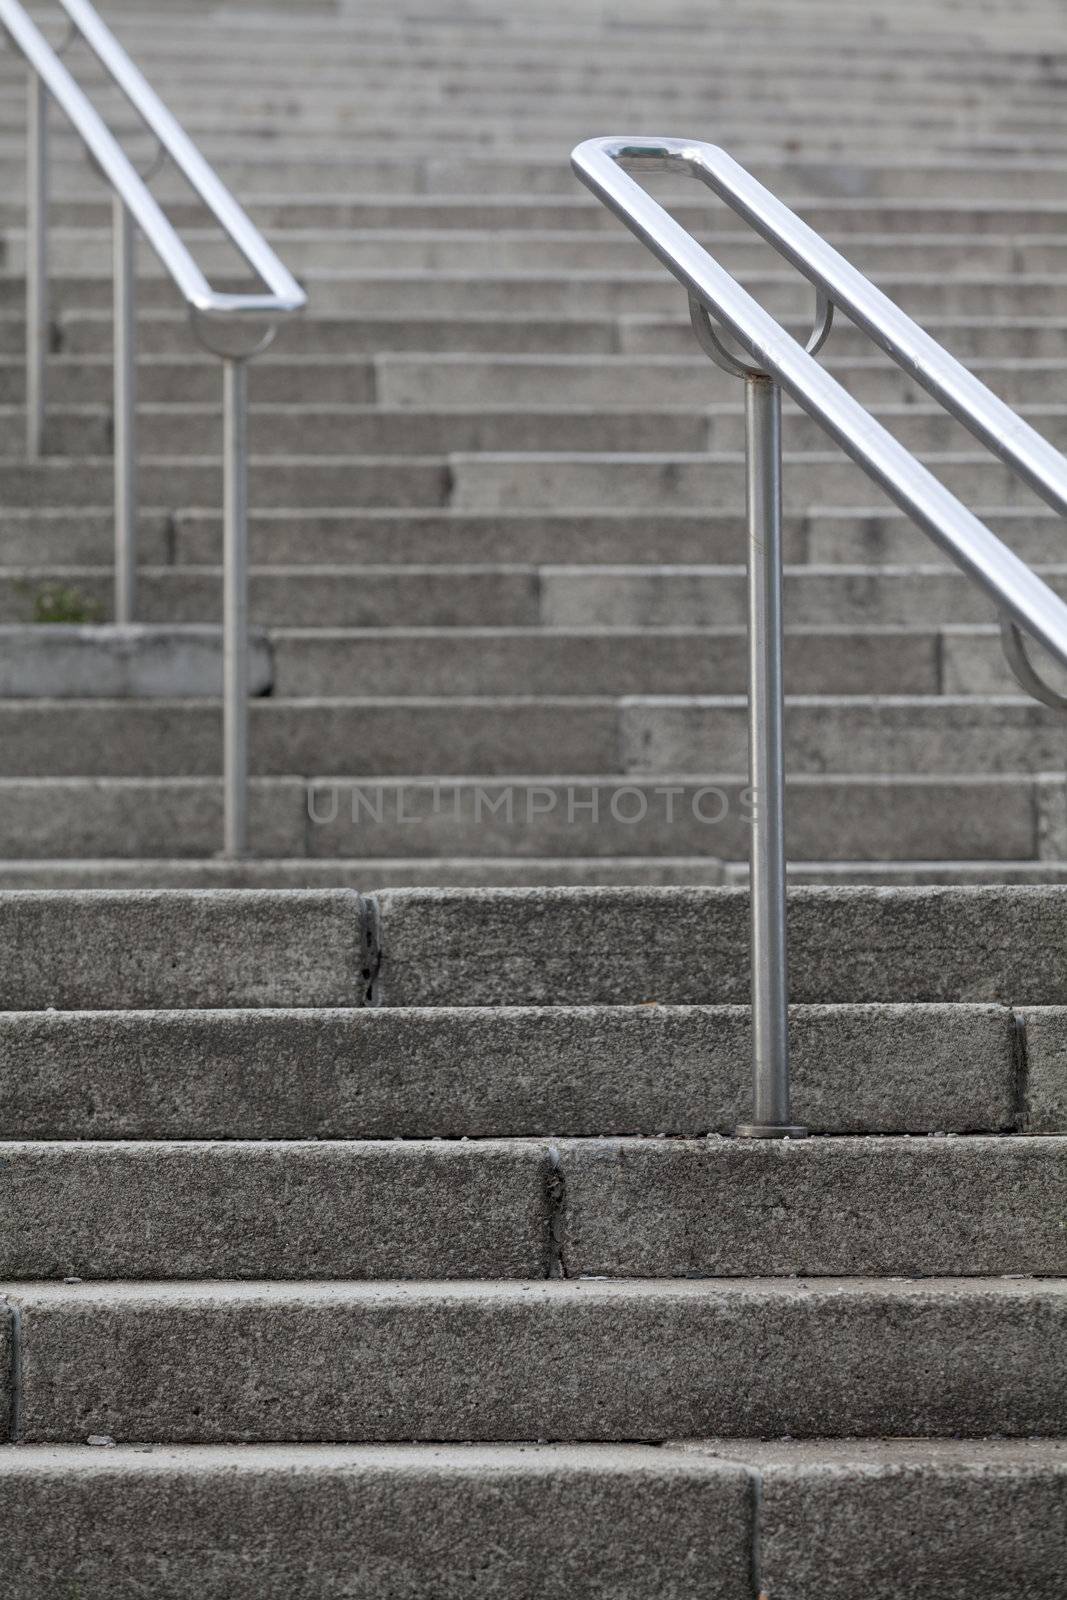 Scenic of clean outdoor steps in public places with metallic handrail